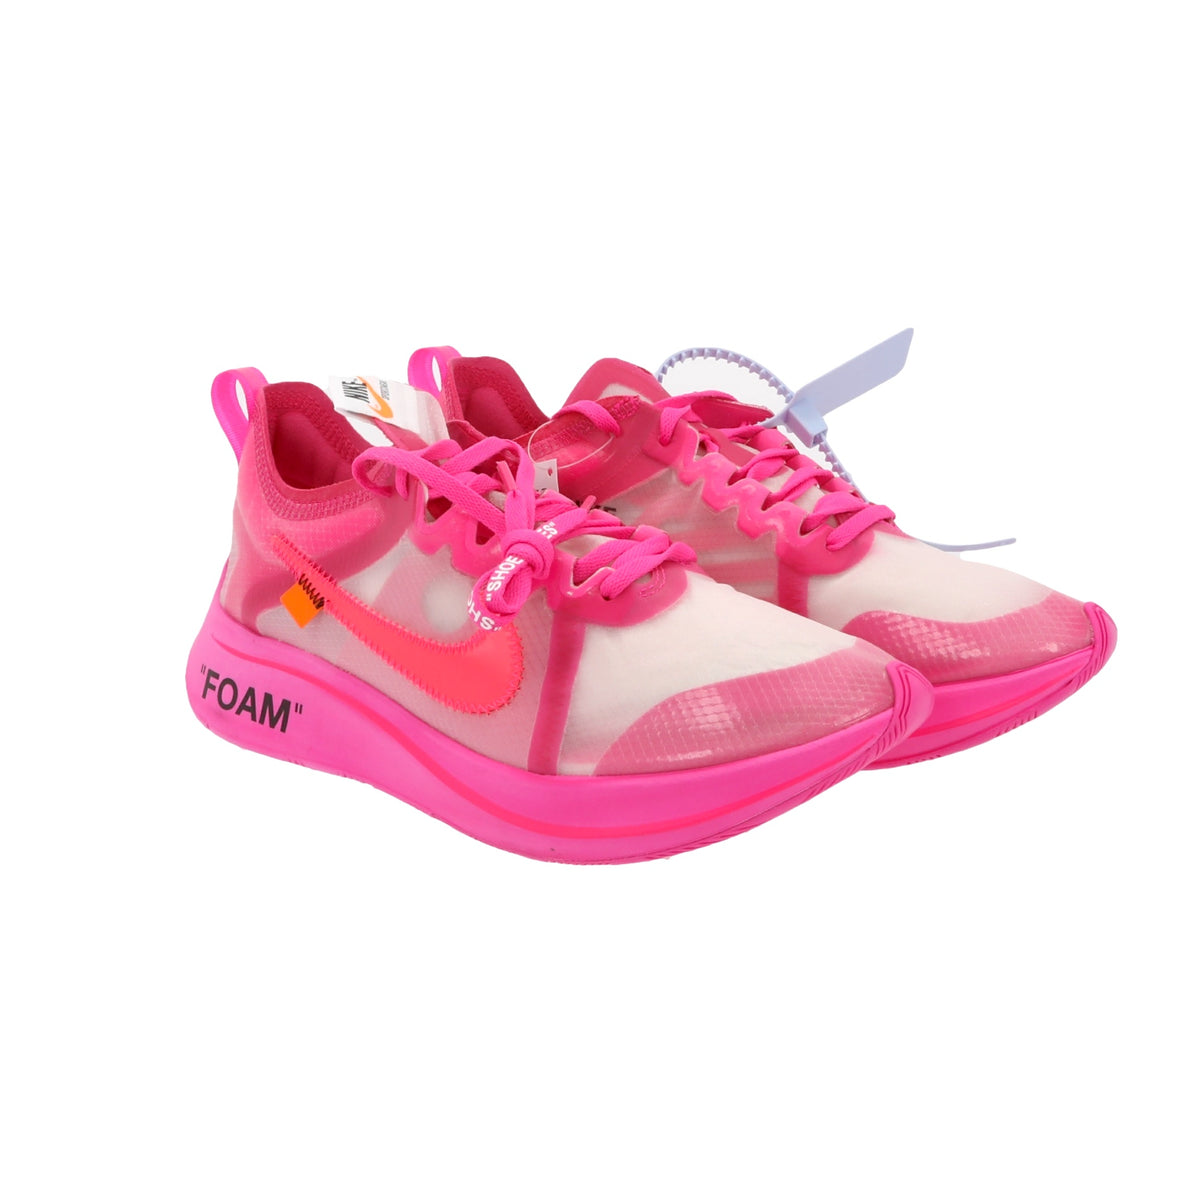 Nike Fly Off-White Pink US 8.5 Fancy Lux